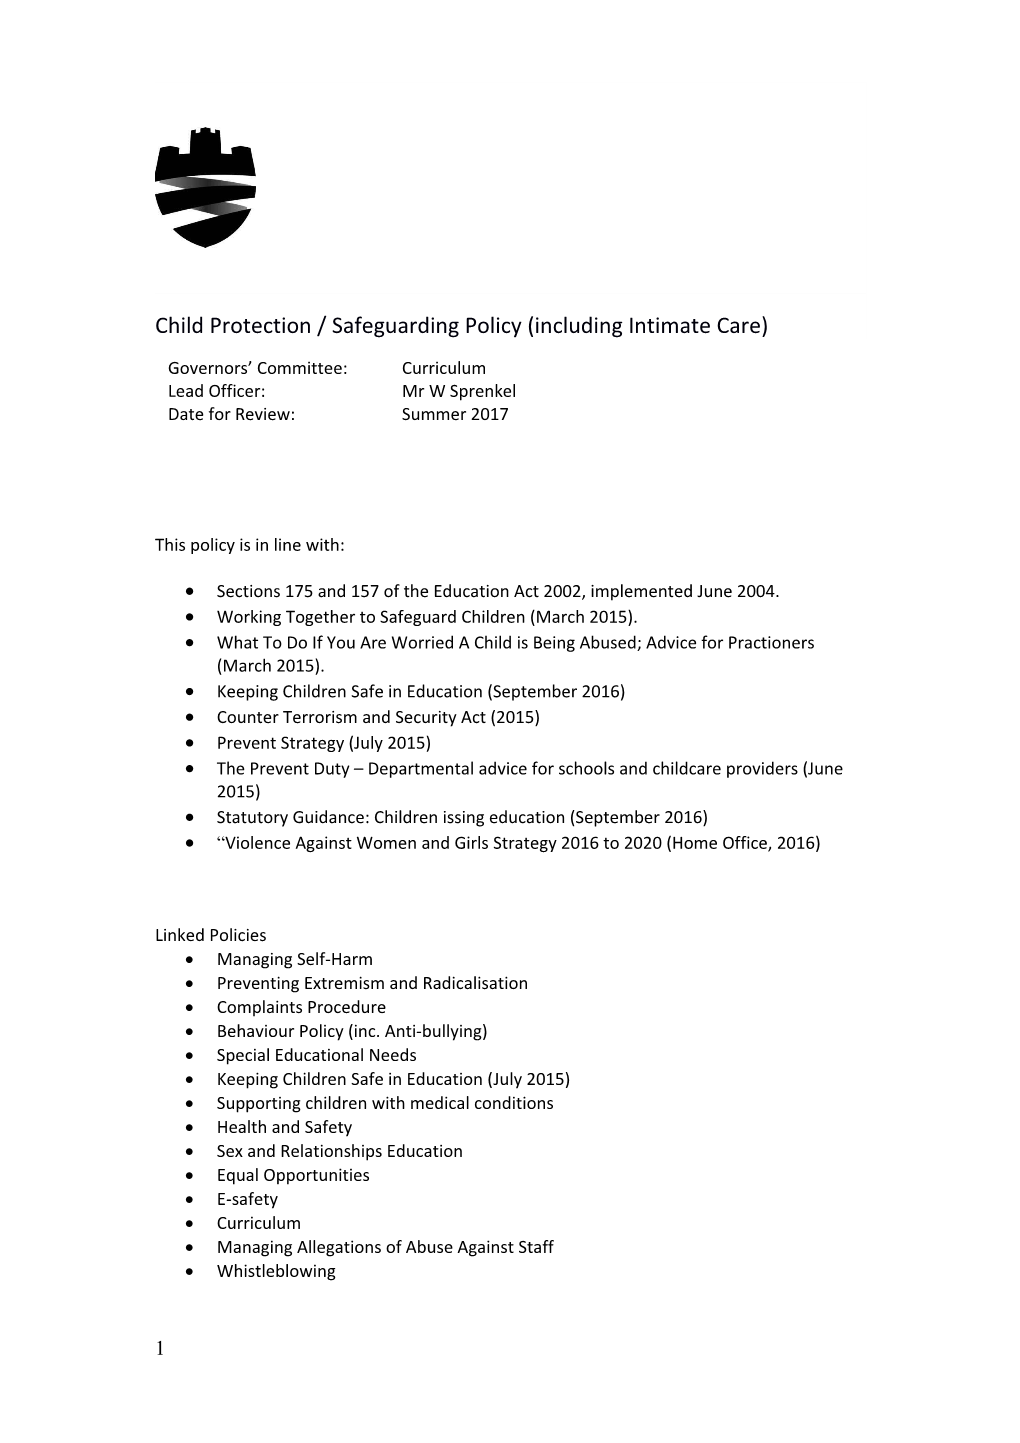 Child Protection / Safeguarding Policy (Including Intimate Care)